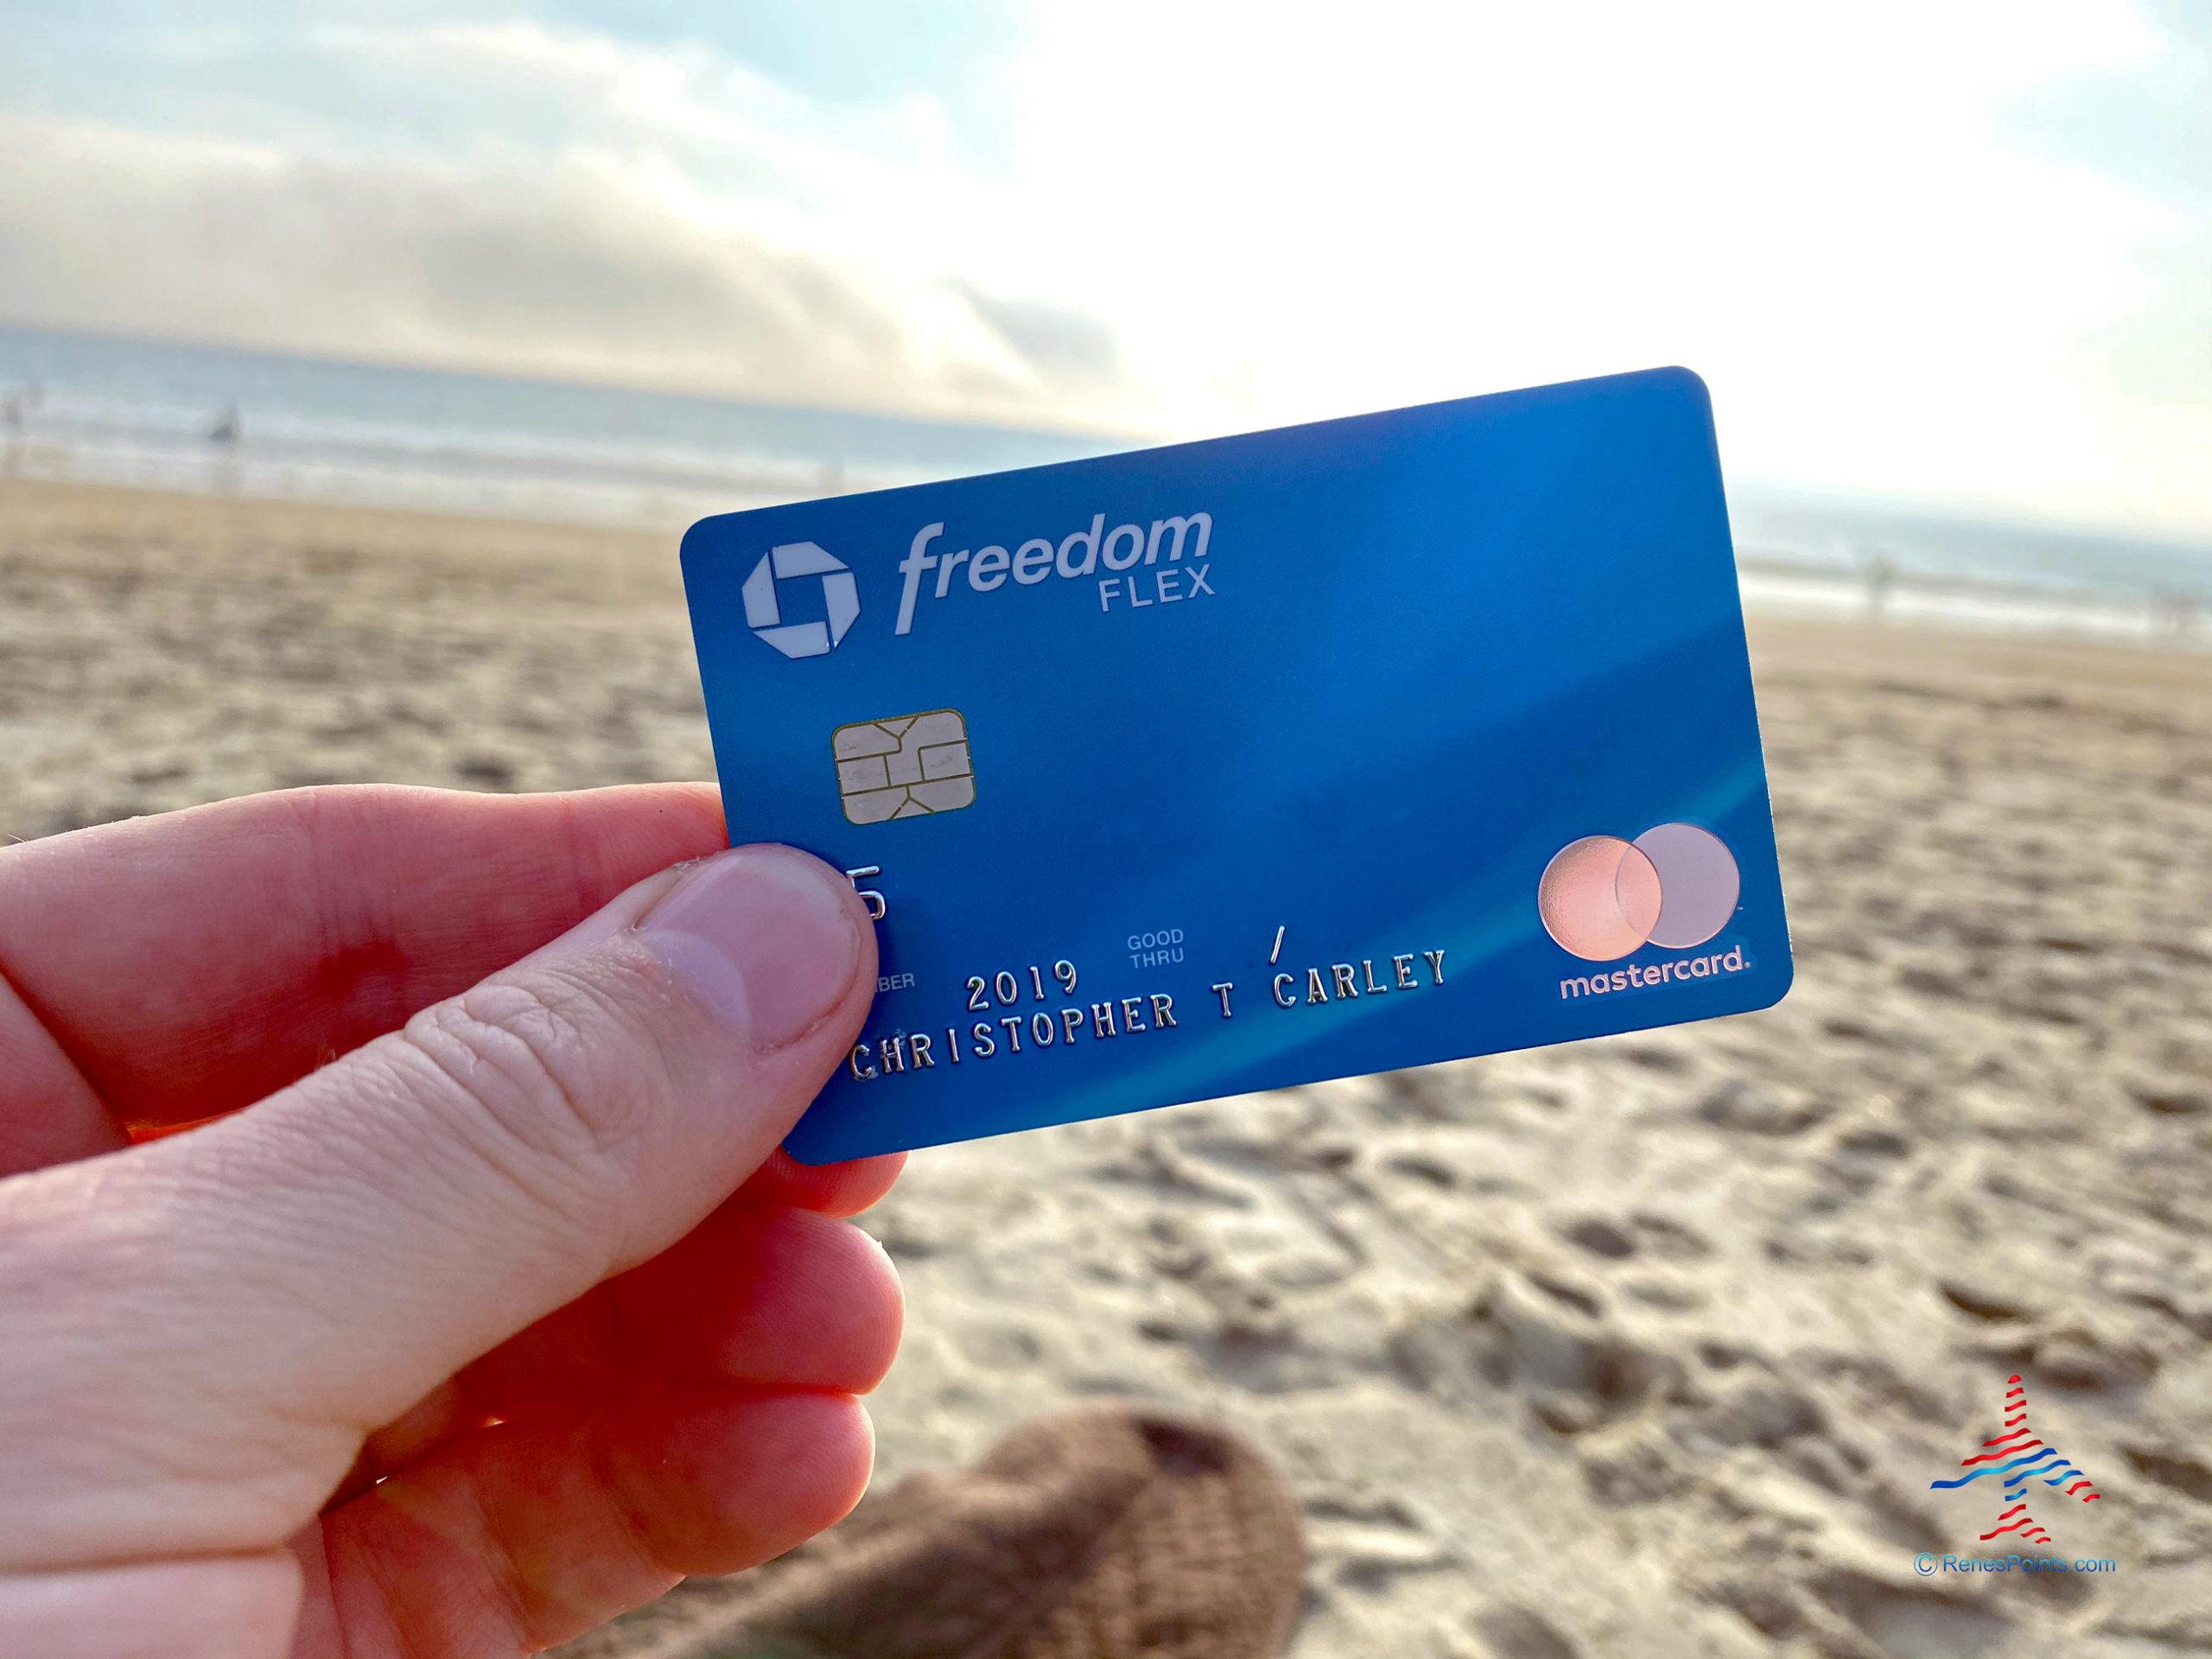 The Chase Freedom Flex card earns Ultimate Rewards points -- which can help make a dream beach vacation come true!